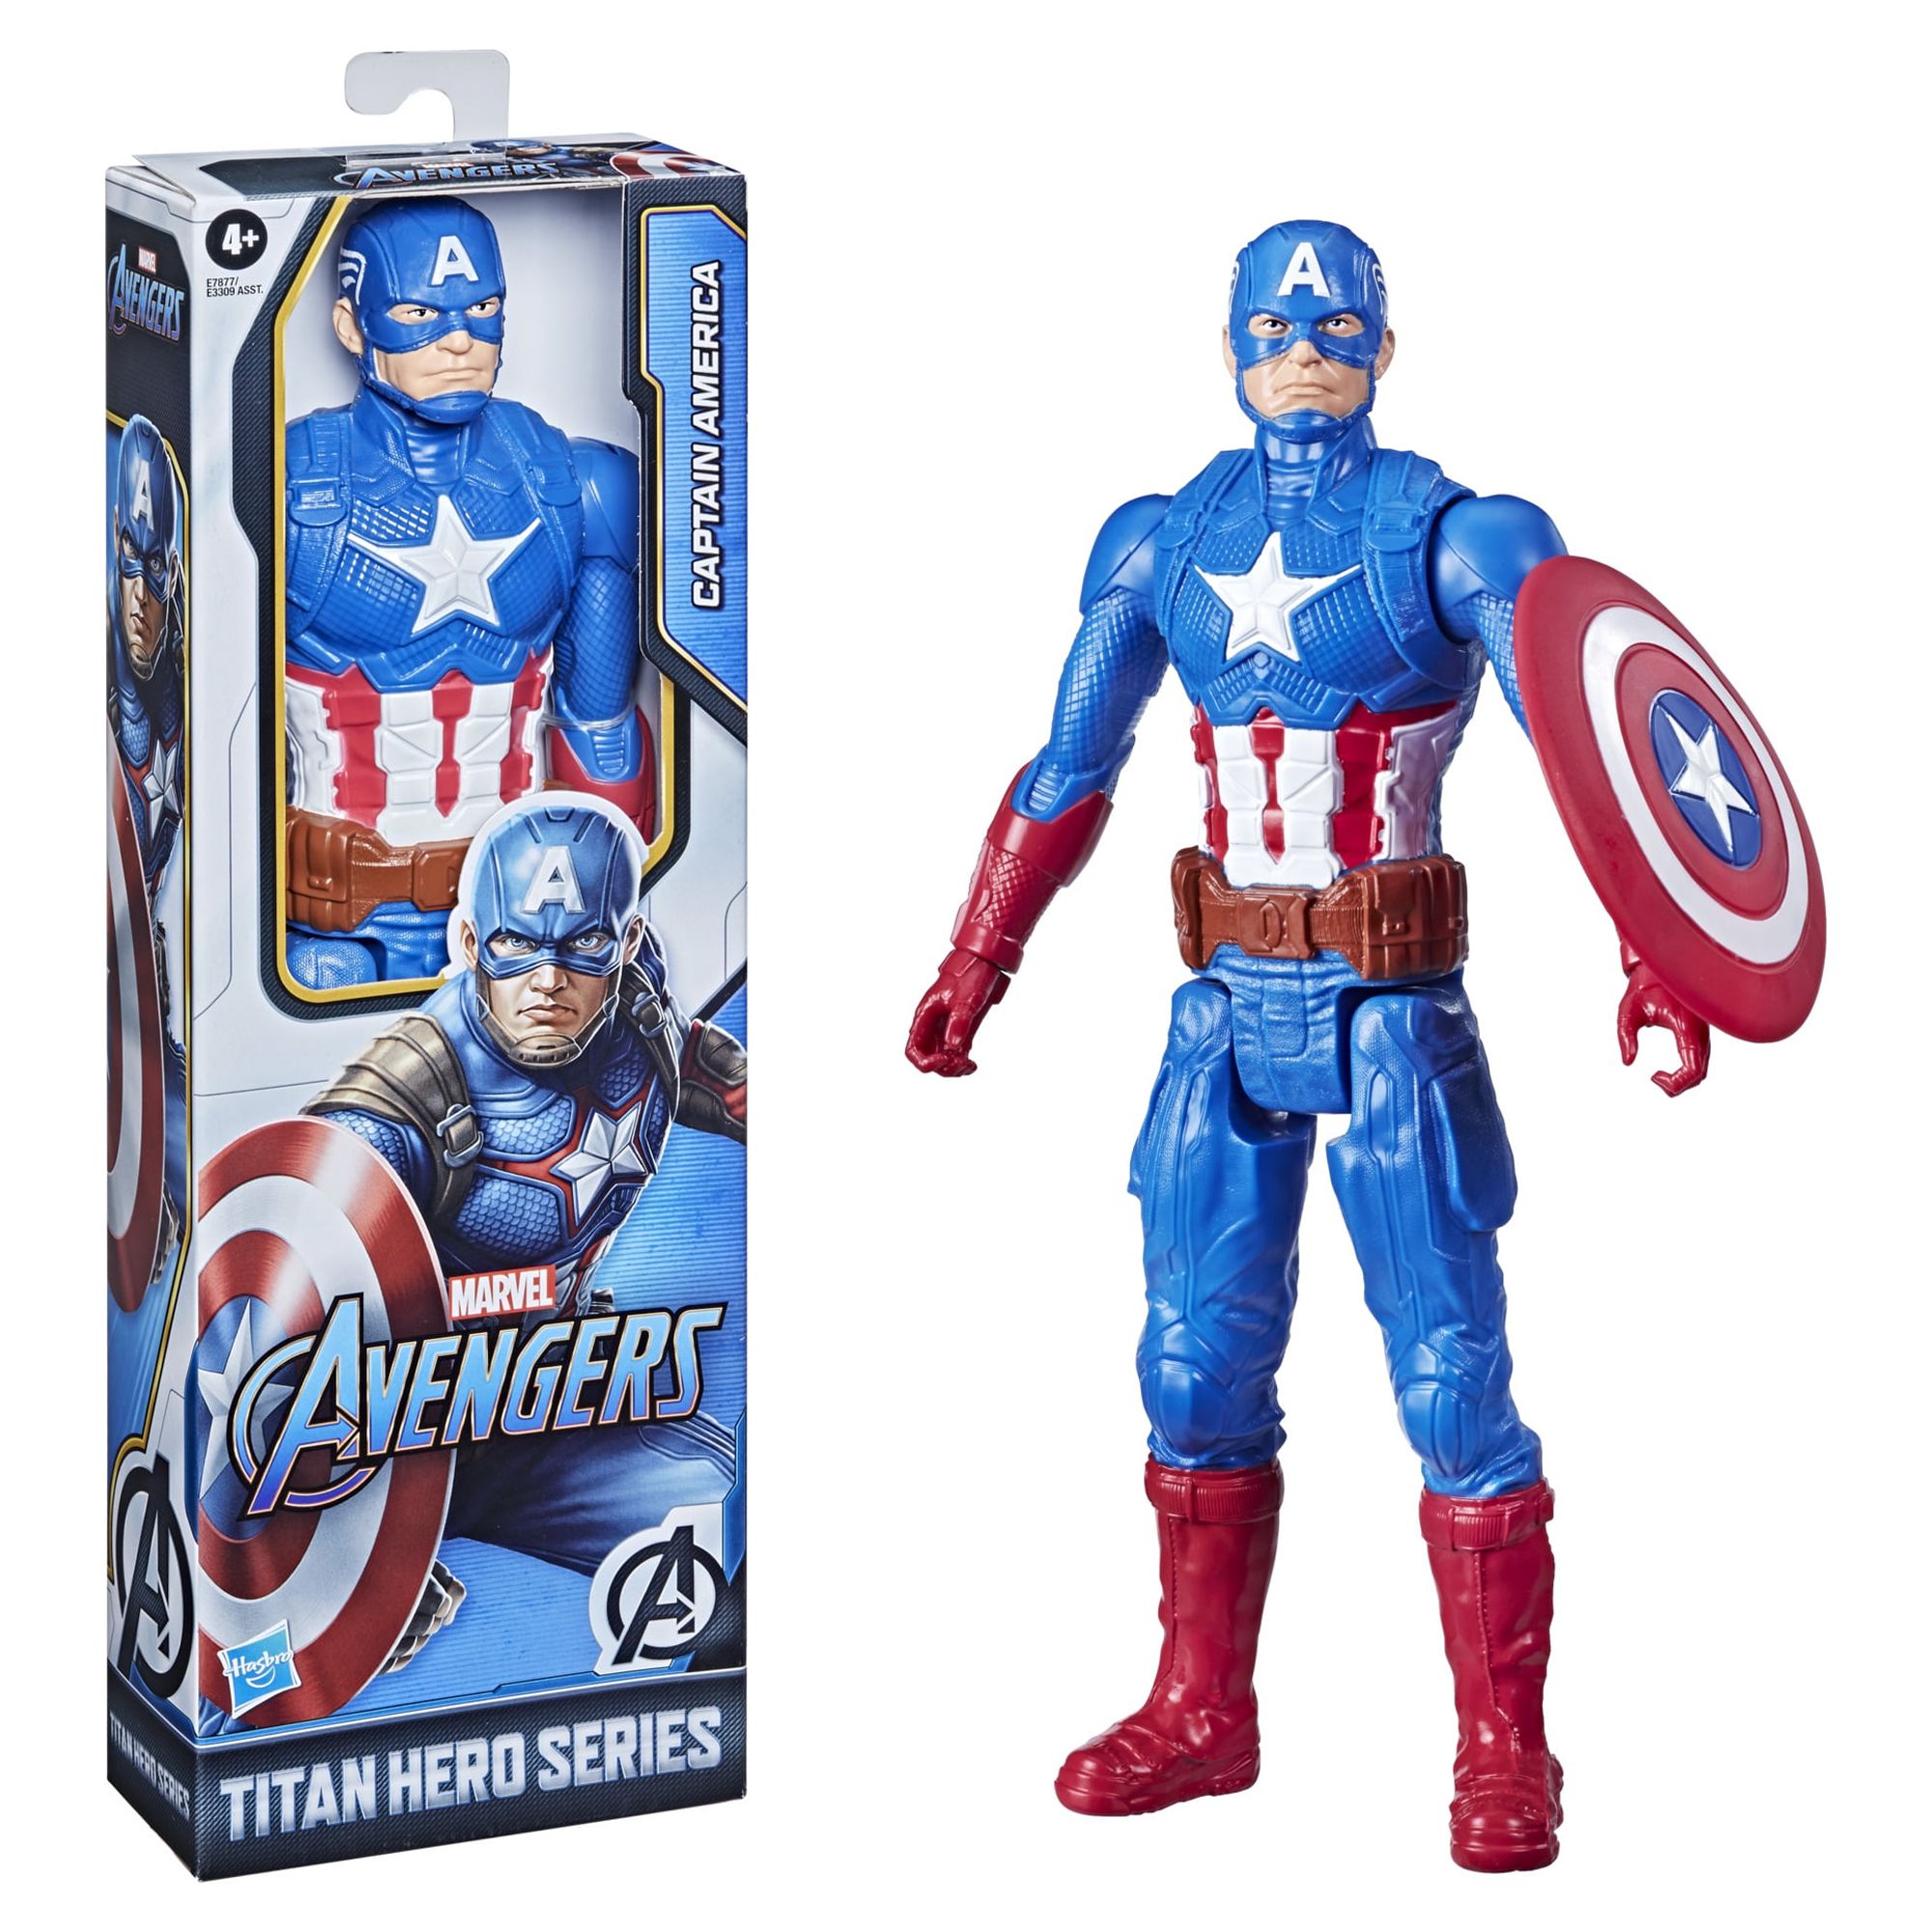 Marvel: Avengers Titan Hero Series Captain America Kids Toy Action Figure for Boys and Girls Ages 4 5 6 7 8 and Up (12”) - image 1 of 8